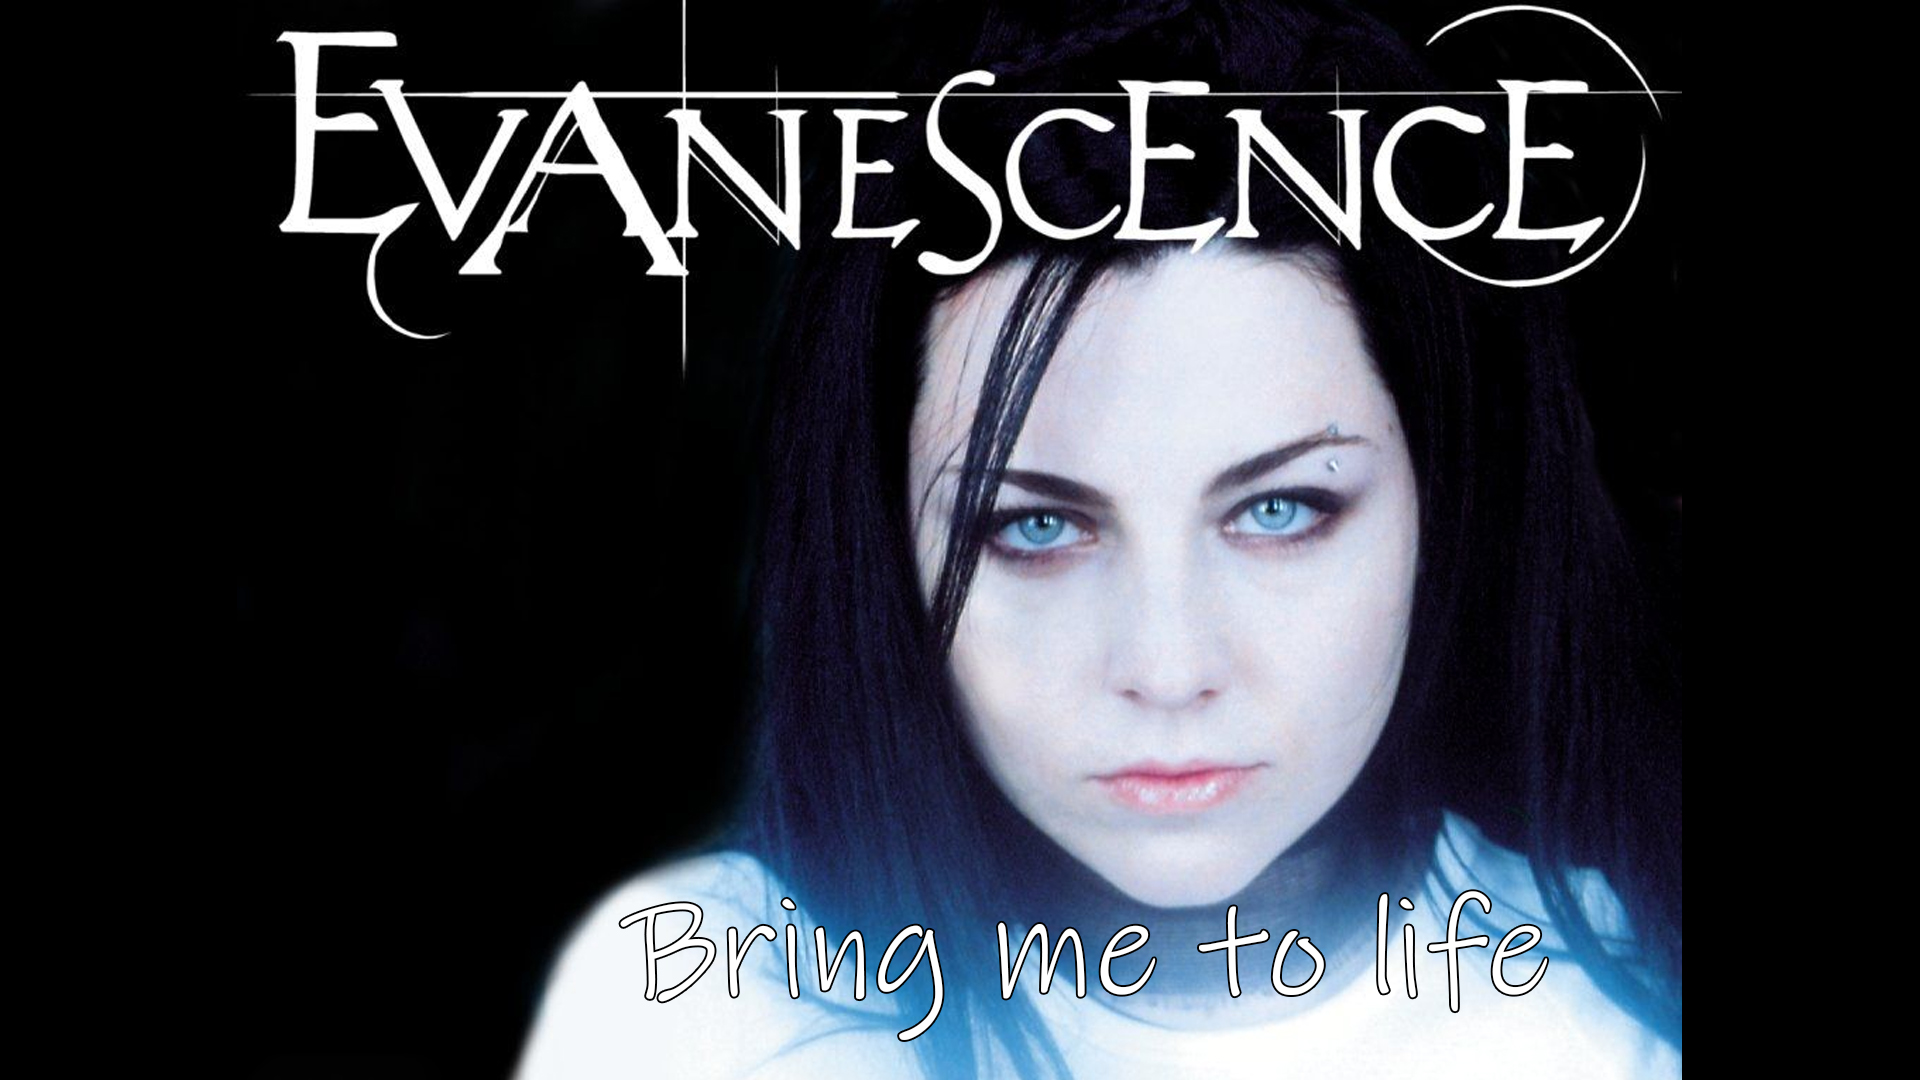 Evanescence Bring Me To Life. Caver